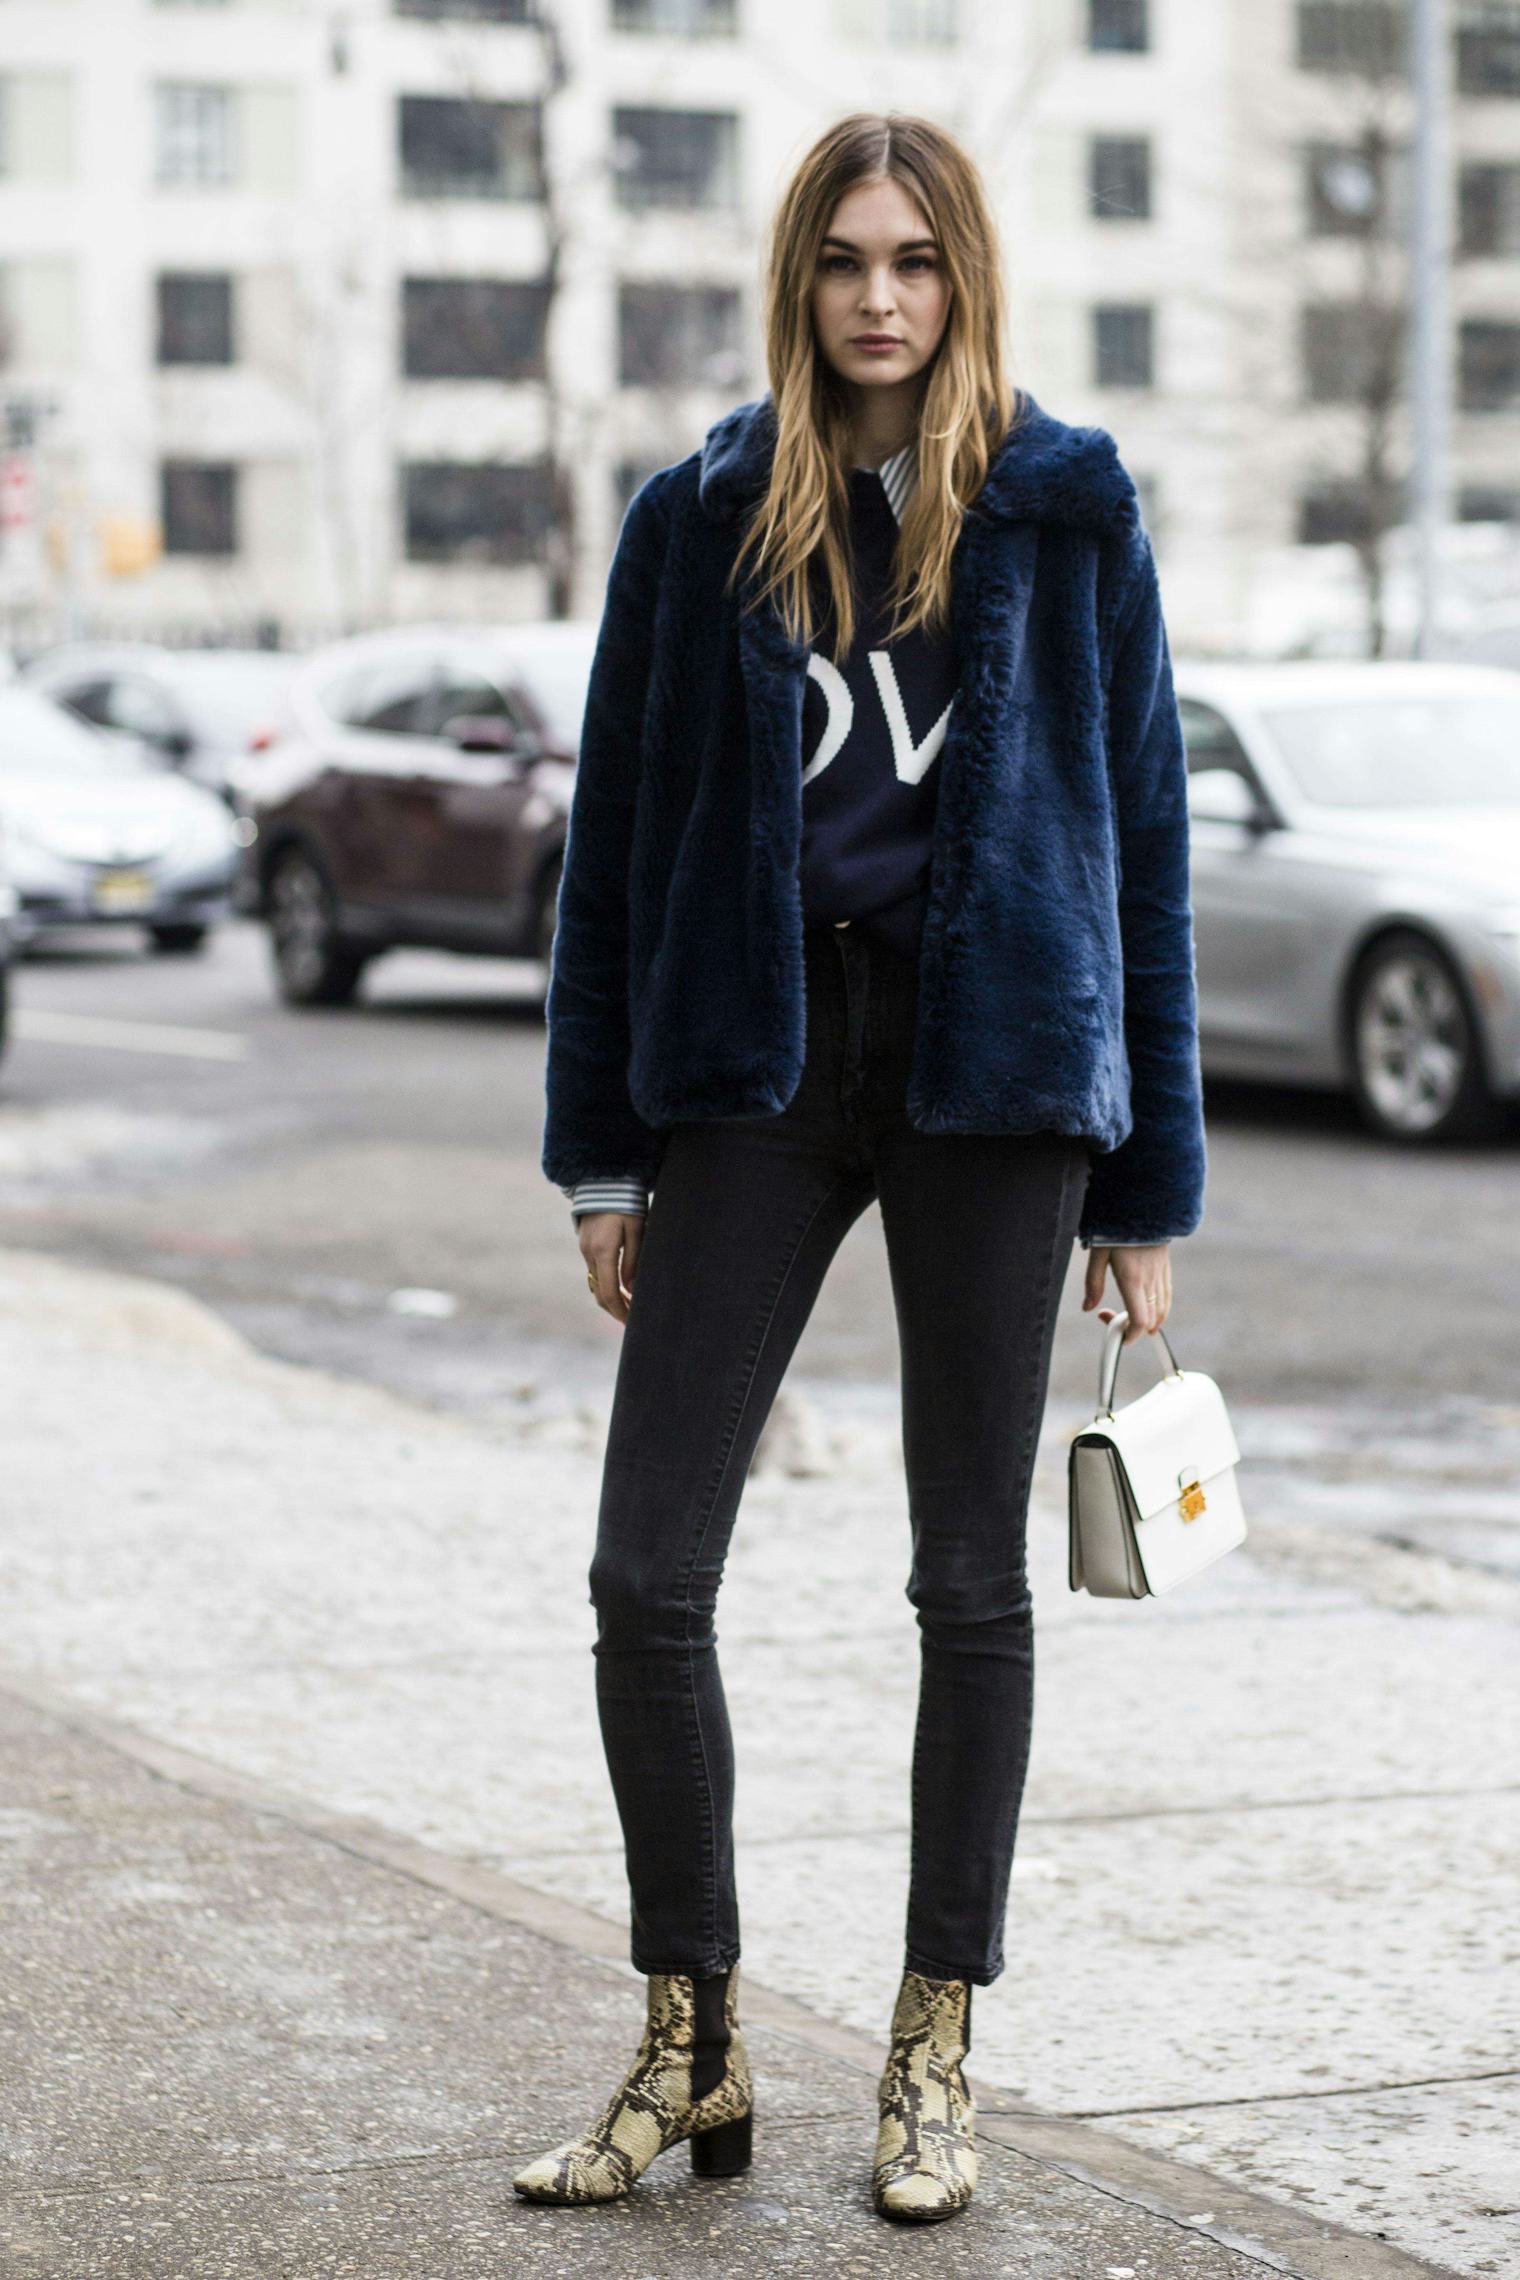 9 Skinny Jeans & Boots Outfits To Try In The Next 90 Days